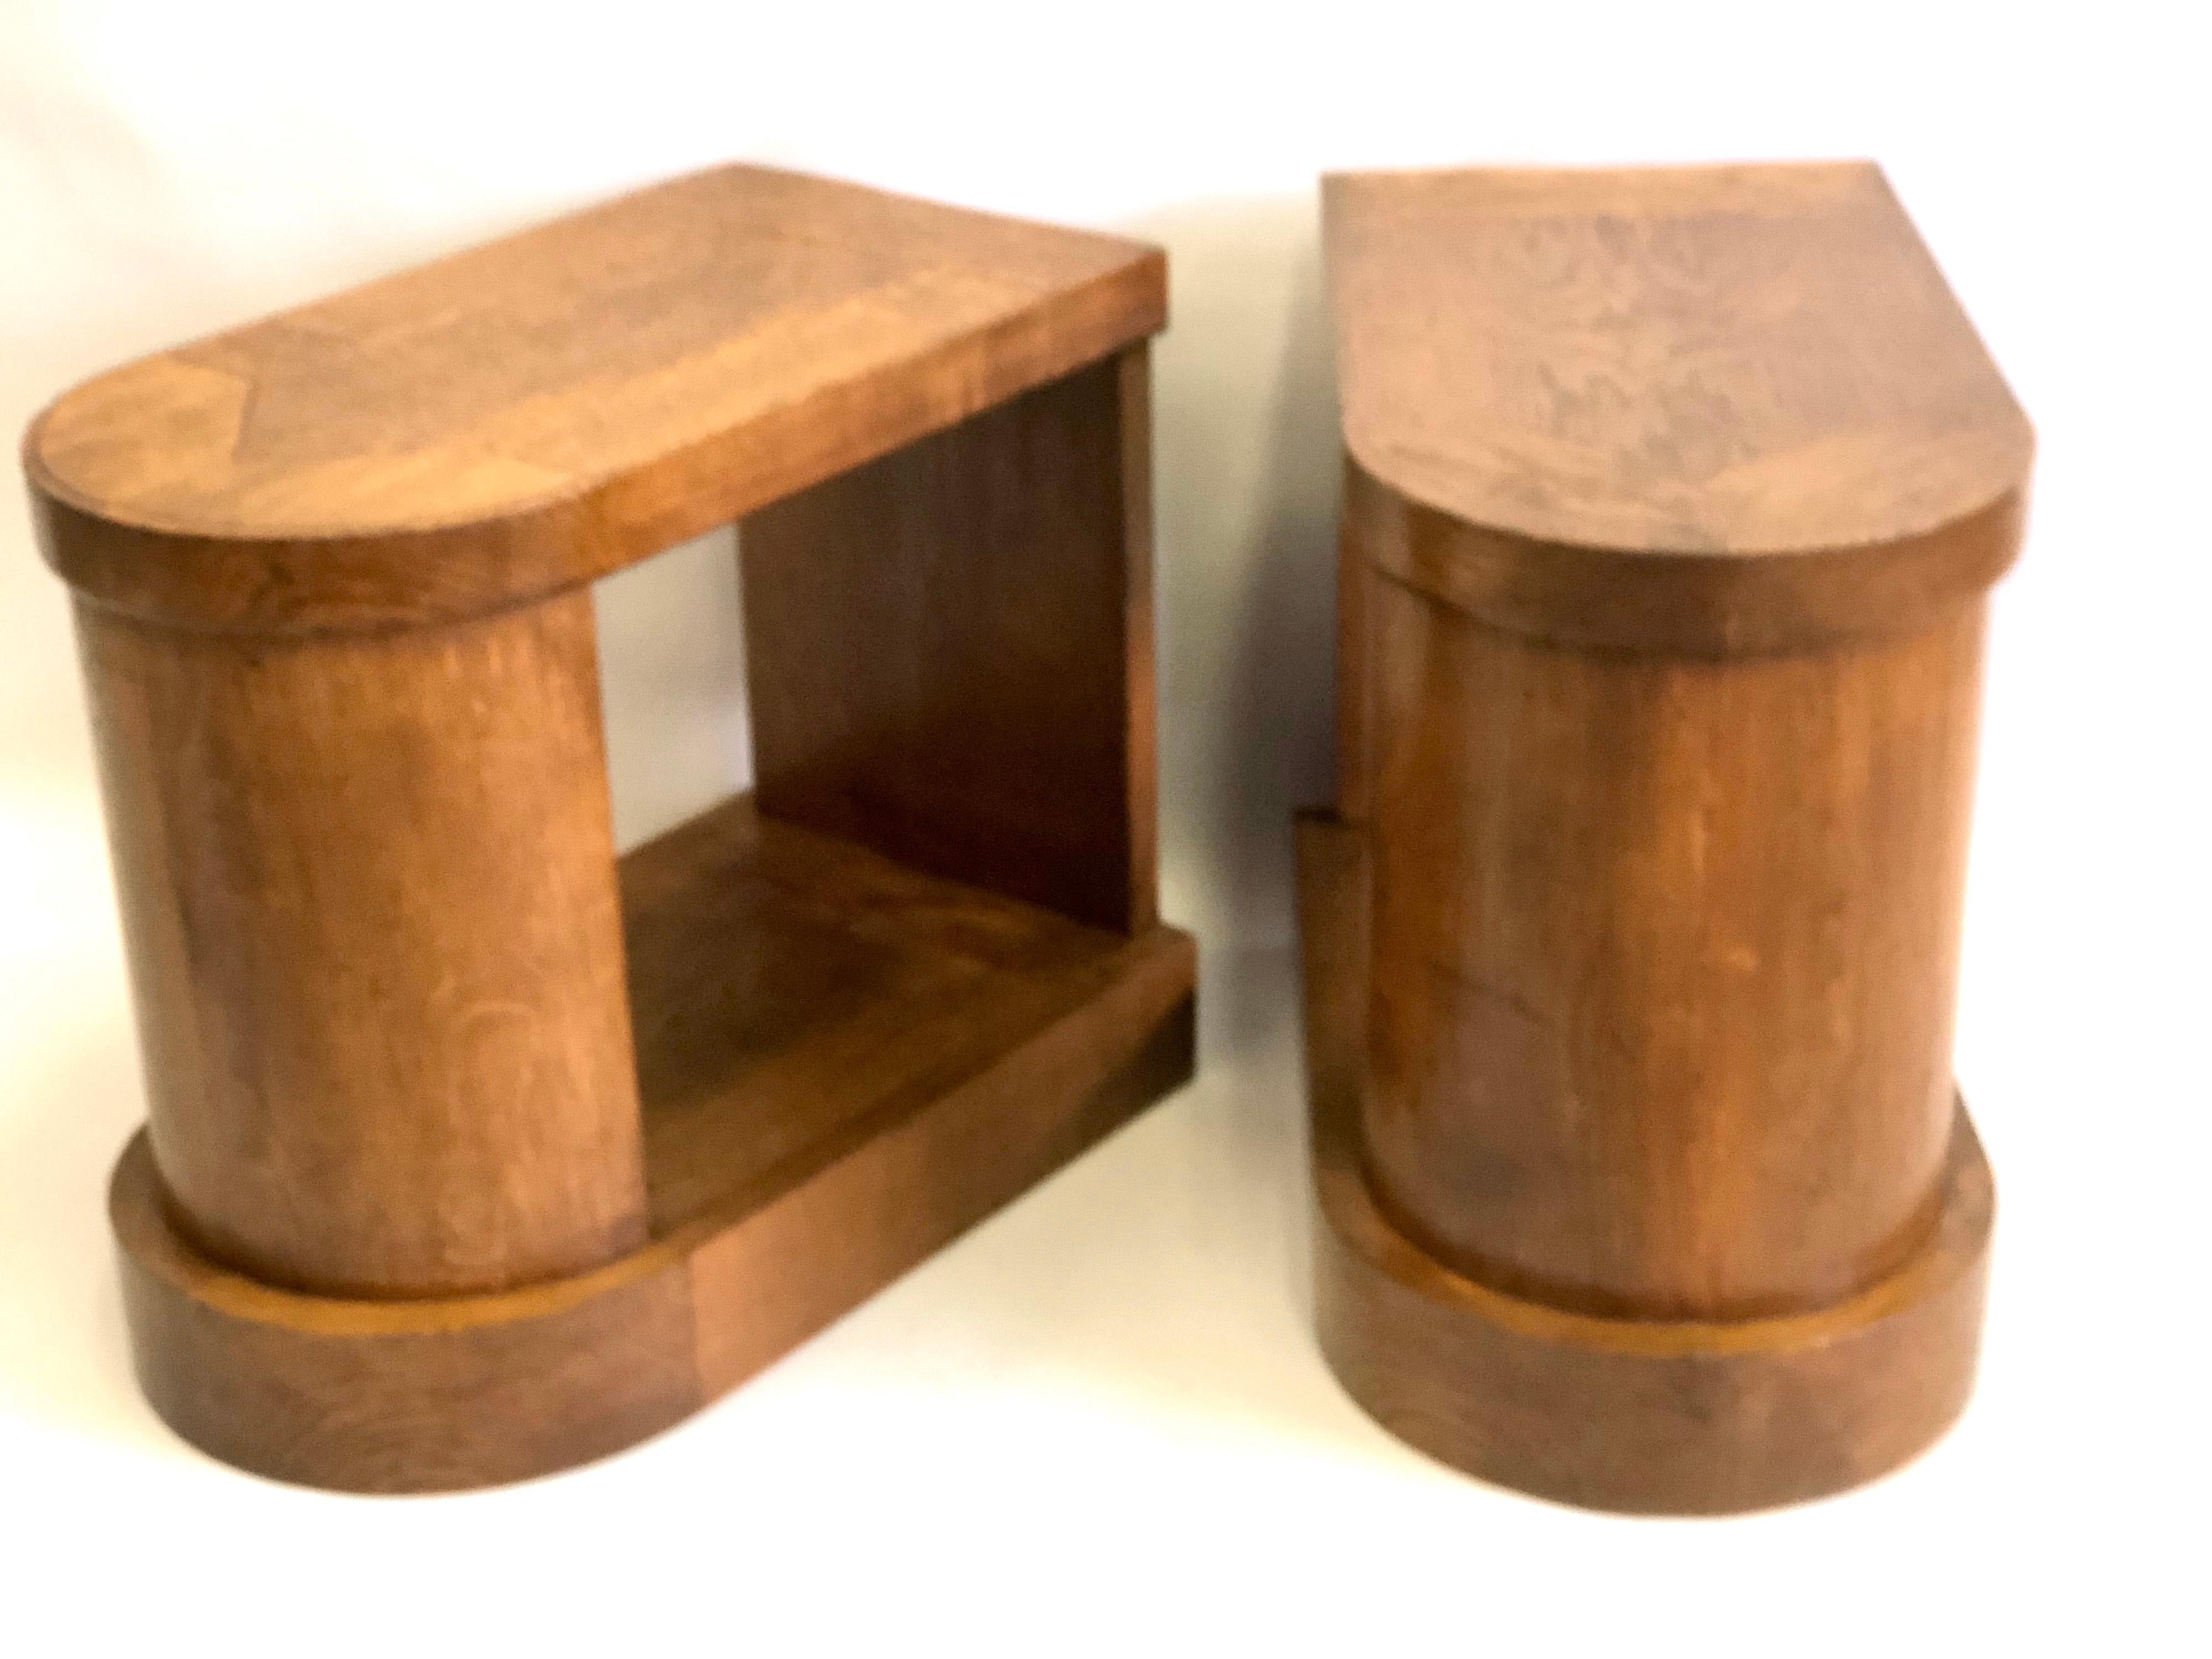 20th Century Pair of French Mid-Century Modern Oak End Tables or Nightstands, Pierre Legrain